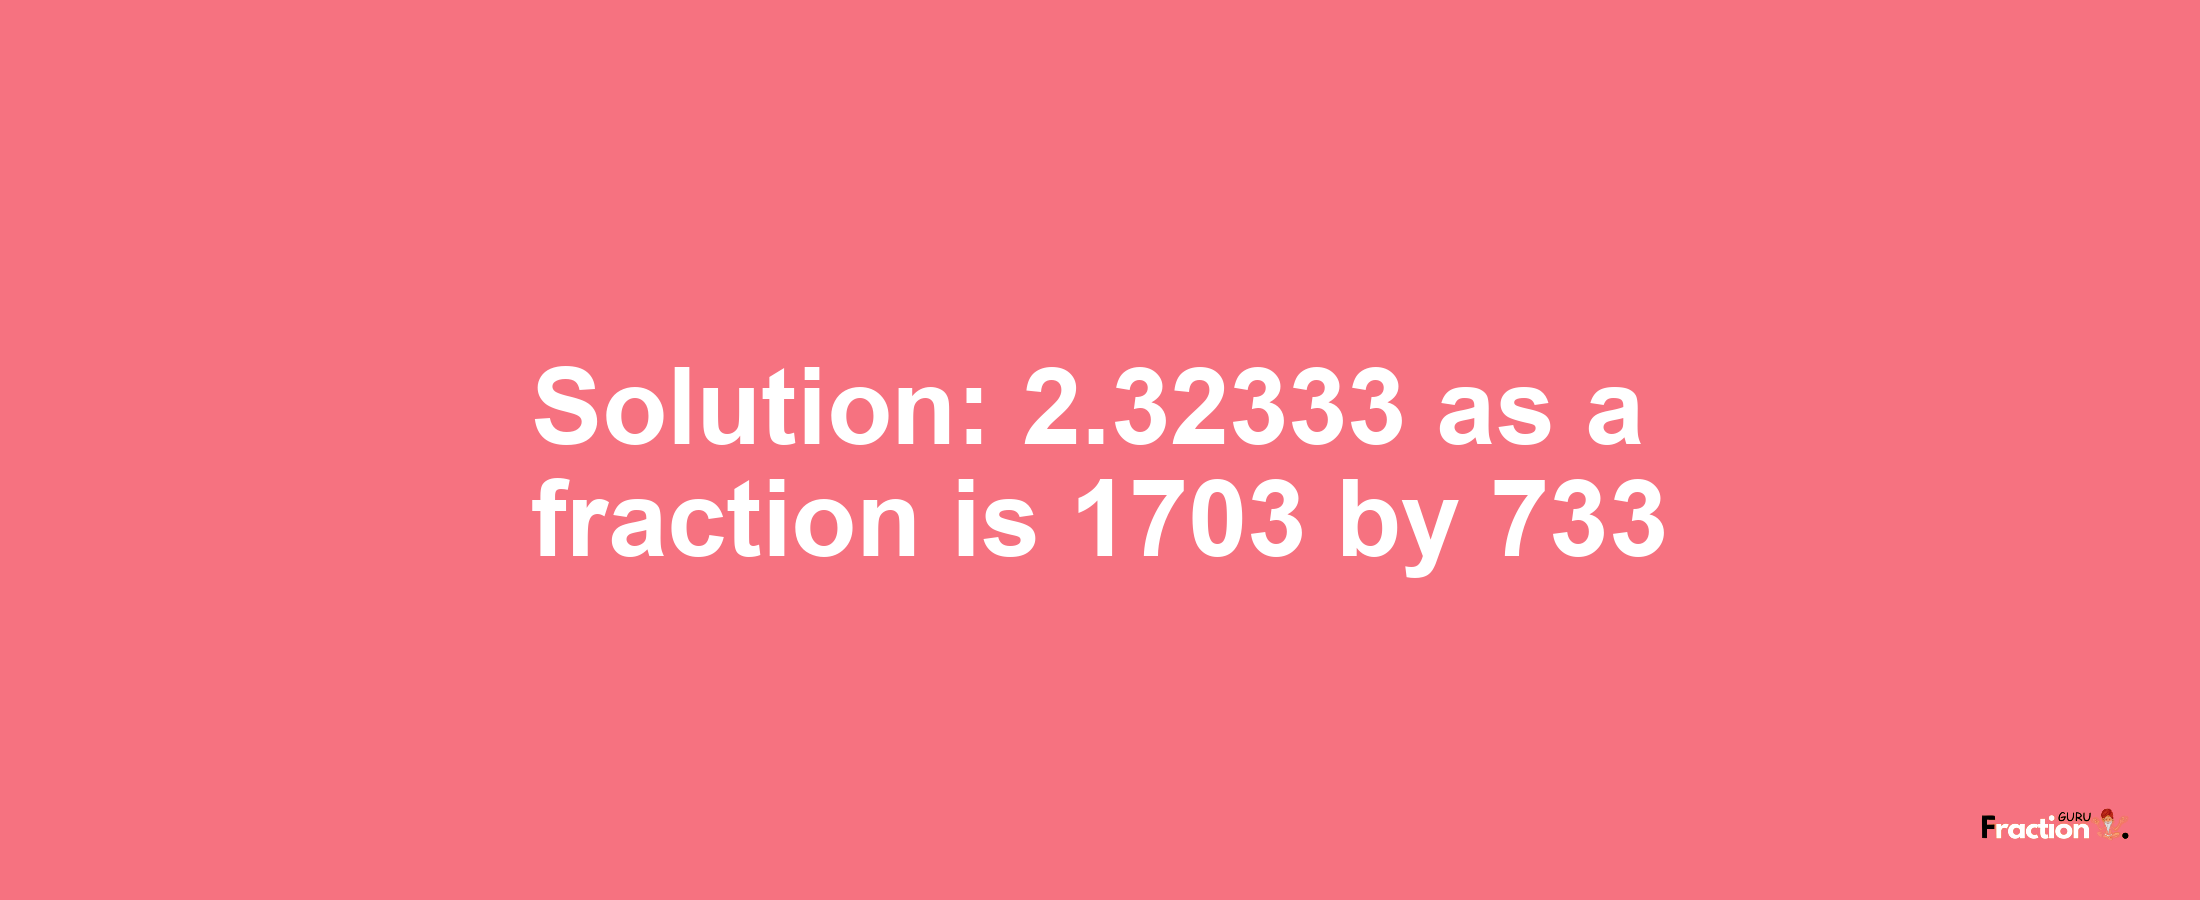 Solution:2.32333 as a fraction is 1703/733